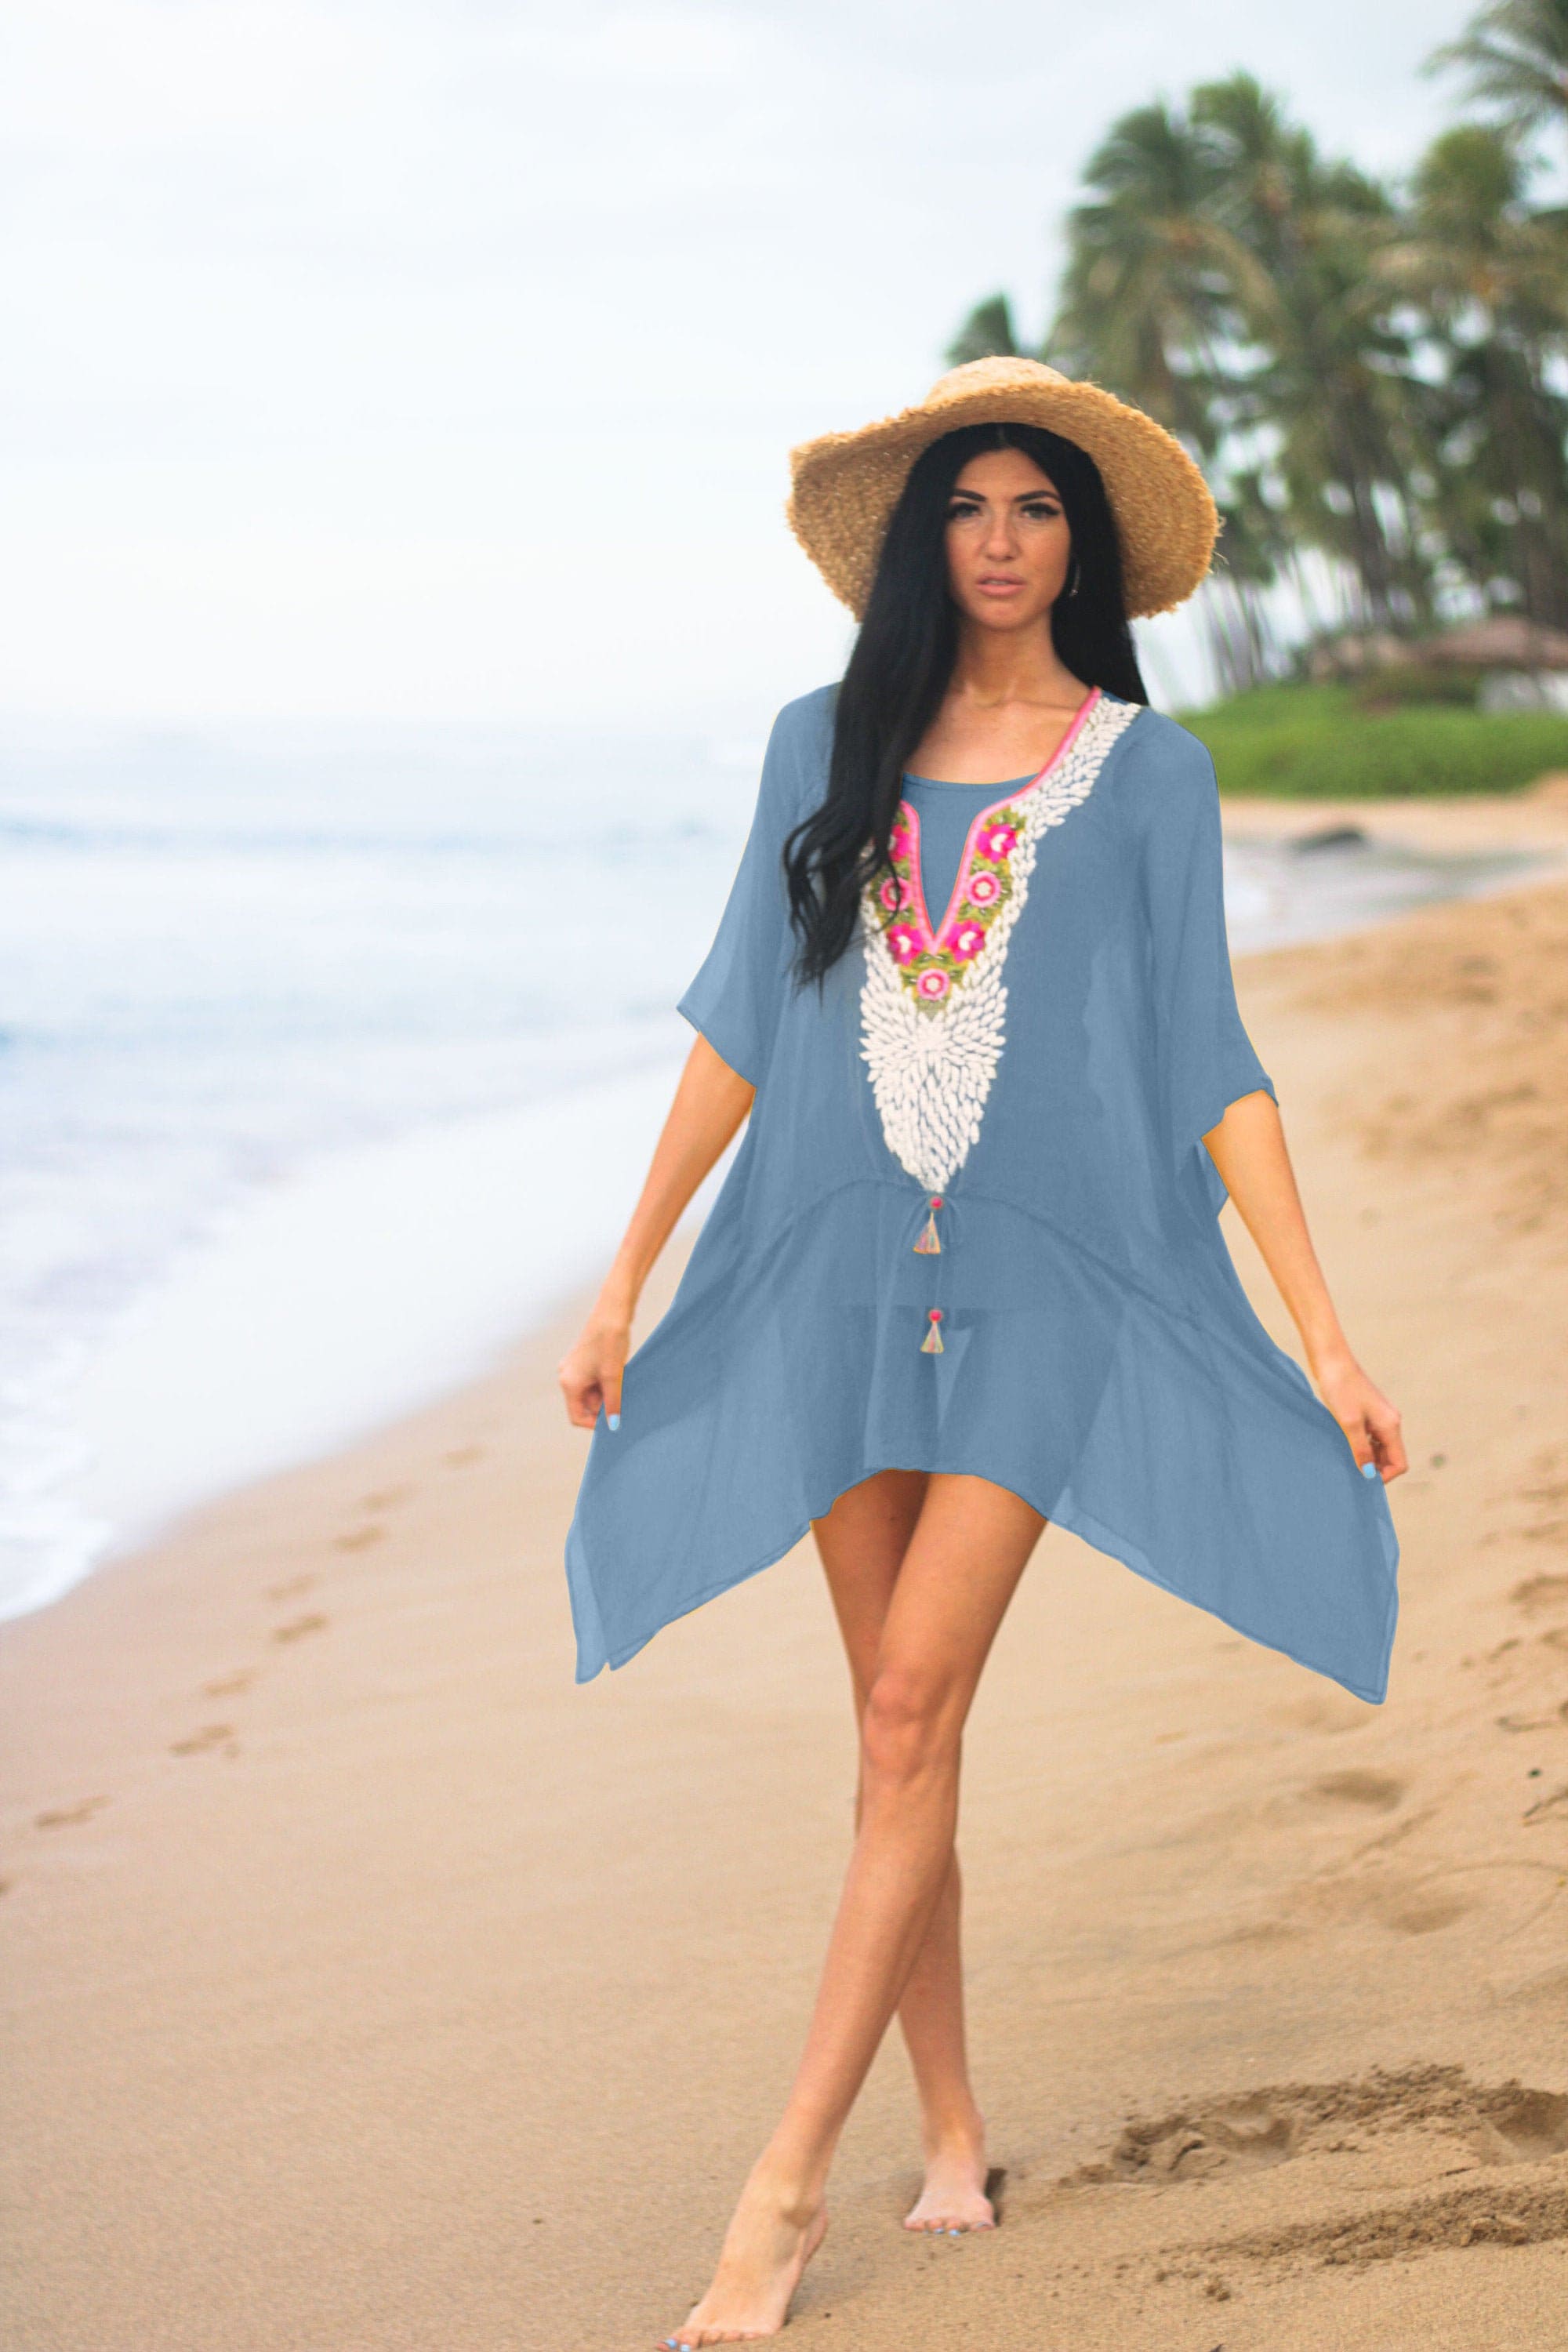 Perfect Beach Cover-ups & Loungewear for Summer Vacation - Trendy Boho Chic Clothing with Vibrant Patterns